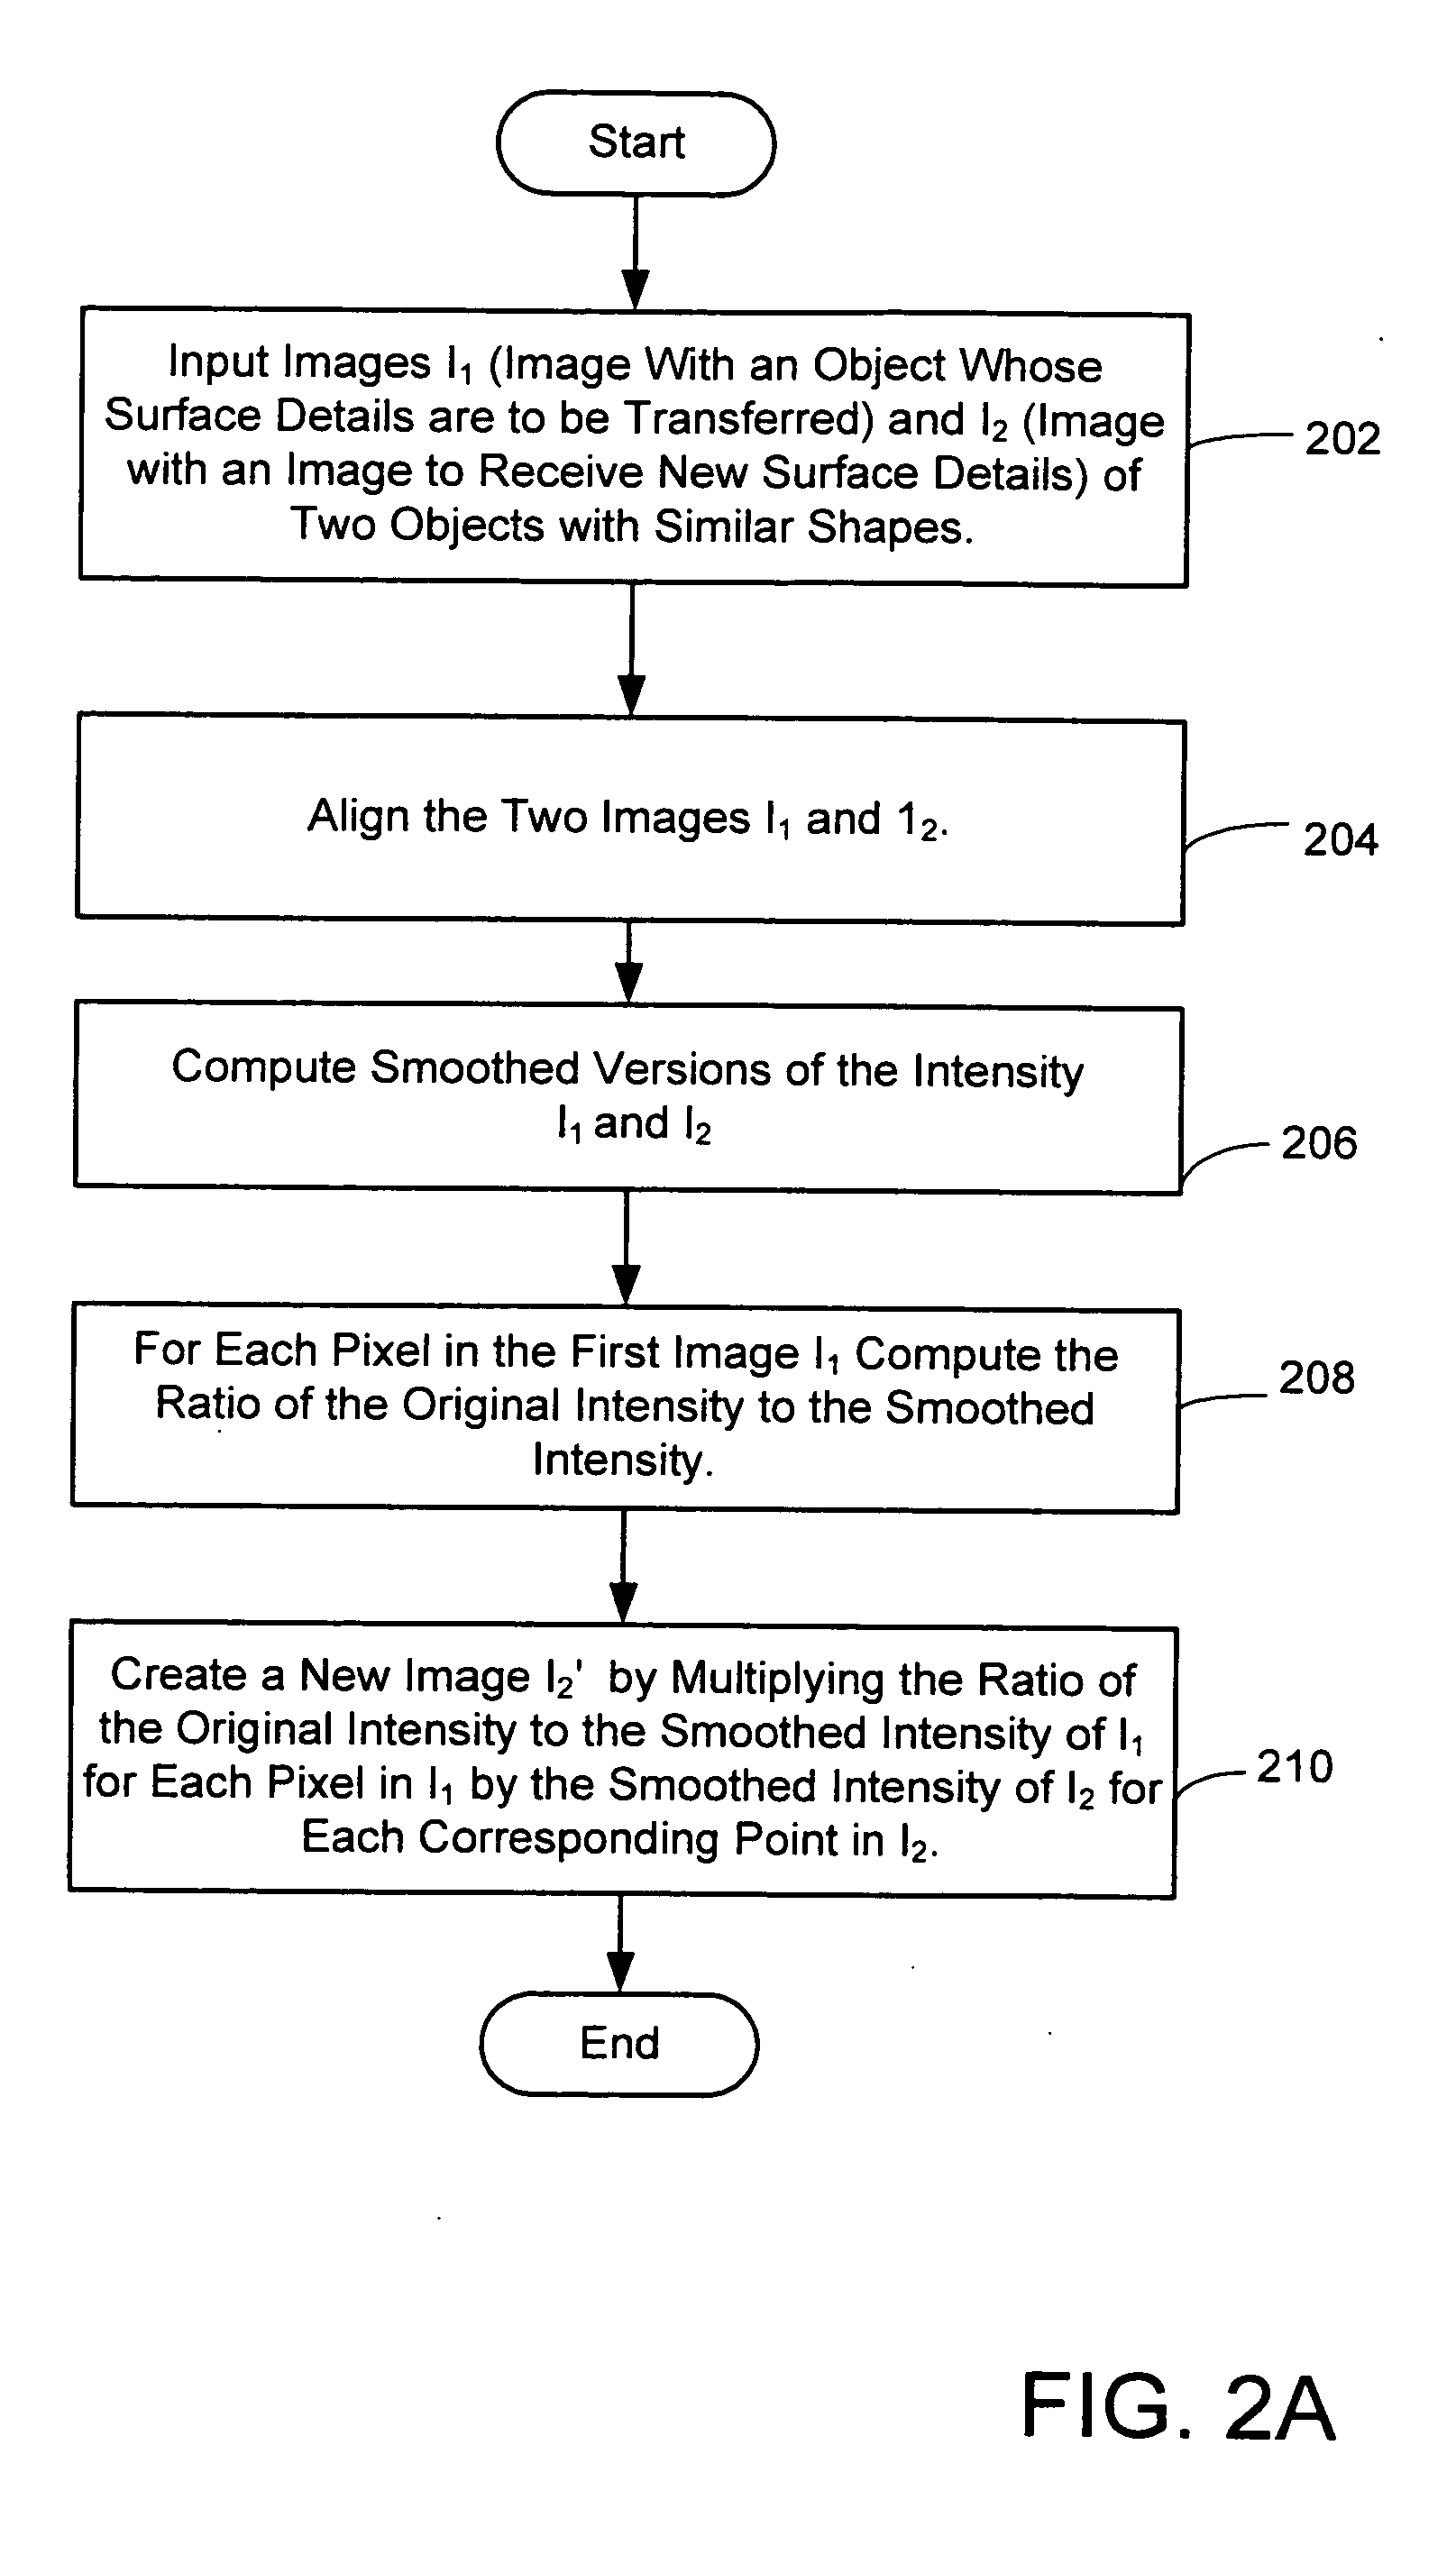 System and method for image-based surface detail transfer